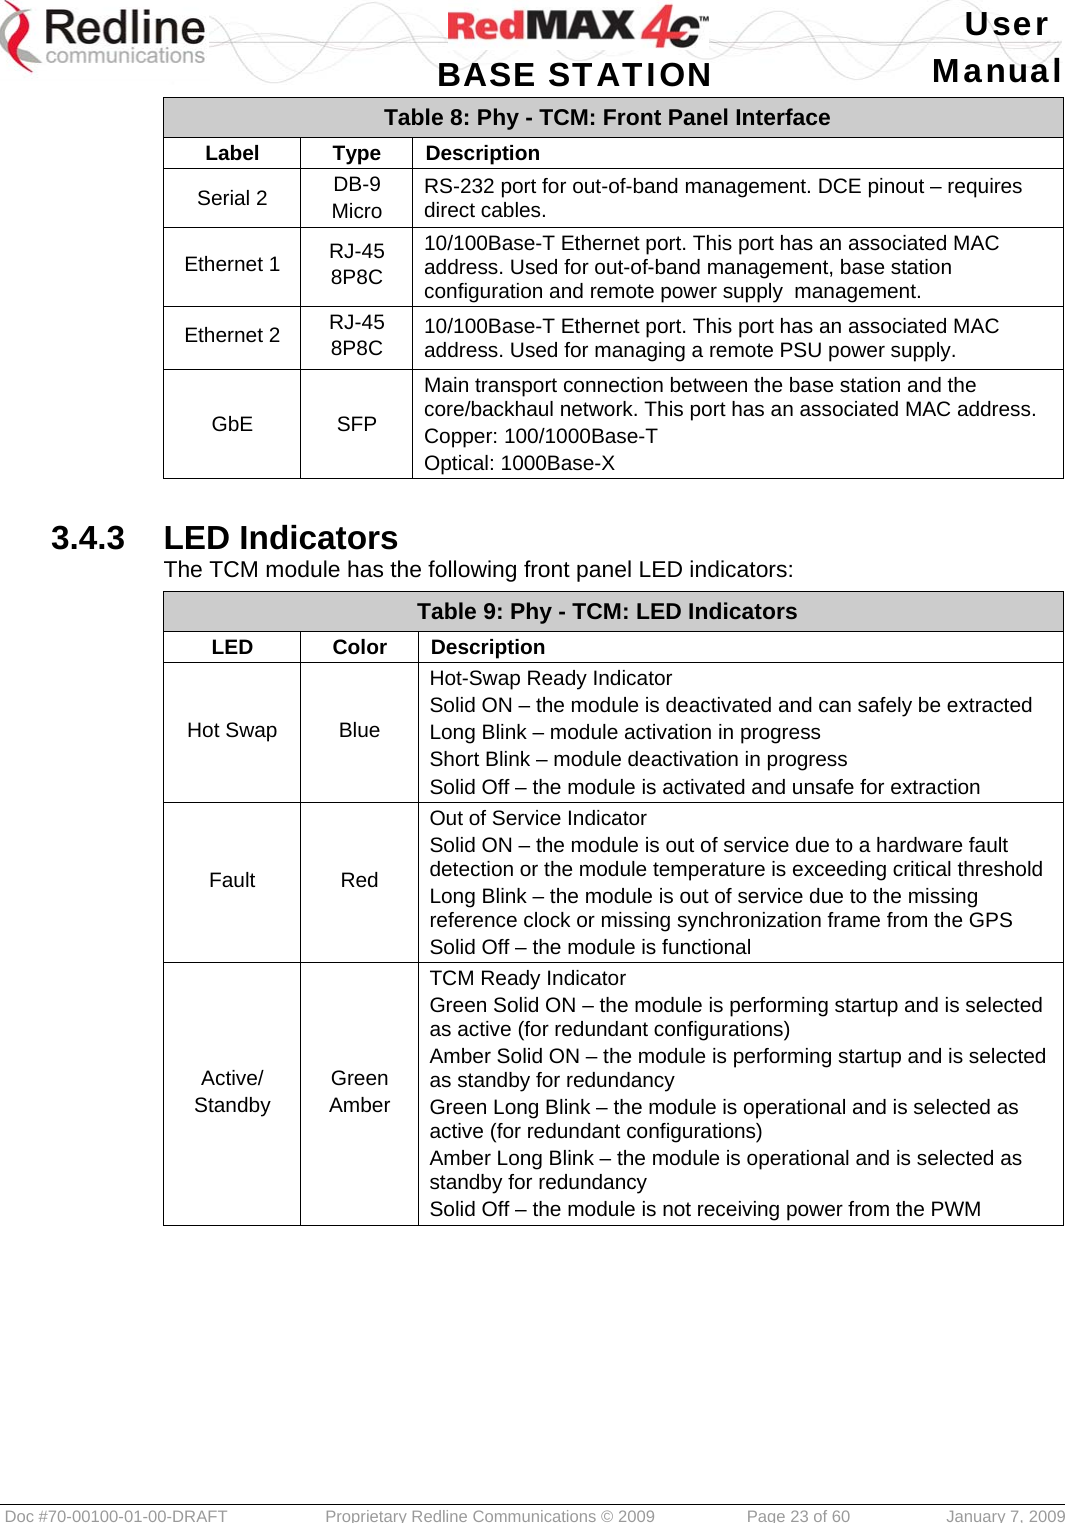   User  BASE STATION Manual  Doc #70-00100-01-00-DRAFT  Proprietary Redline Communications © 2009   Page 23 of 60  January 7, 2009 Table 8: Phy - TCM: Front Panel Interface Label Type Description Serial 2  DB-9 Micro RS-232 port for out-of-band management. DCE pinout – requires direct cables. Ethernet 1 RJ-45 8P8C 10/100Base-T Ethernet port. This port has an associated MAC address. Used for out-of-band management, base station  configuration and remote power supply  management. Ethernet 2 RJ-45 8P8C 10/100Base-T Ethernet port. This port has an associated MAC address. Used for managing a remote PSU power supply. GbE SFP Main transport connection between the base station and the core/backhaul network. This port has an associated MAC address. Copper: 100/1000Base-T Optical: 1000Base-X   3.4.3  LED Indicators The TCM module has the following front panel LED indicators: Table 9: Phy - TCM: LED Indicators LED Color Description Hot Swap Blue Hot-Swap Ready Indicator Solid ON – the module is deactivated and can safely be extracted Long Blink – module activation in progress  Short Blink – module deactivation in progress  Solid Off – the module is activated and unsafe for extraction Fault Red Out of Service Indicator Solid ON – the module is out of service due to a hardware fault detection or the module temperature is exceeding critical threshold Long Blink – the module is out of service due to the missing reference clock or missing synchronization frame from the GPS Solid Off – the module is functional Active/ Standby Green Amber TCM Ready Indicator Green Solid ON – the module is performing startup and is selected as active (for redundant configurations) Amber Solid ON – the module is performing startup and is selected as standby for redundancy Green Long Blink – the module is operational and is selected as active (for redundant configurations)  Amber Long Blink – the module is operational and is selected as standby for redundancy  Solid Off – the module is not receiving power from the PWM     